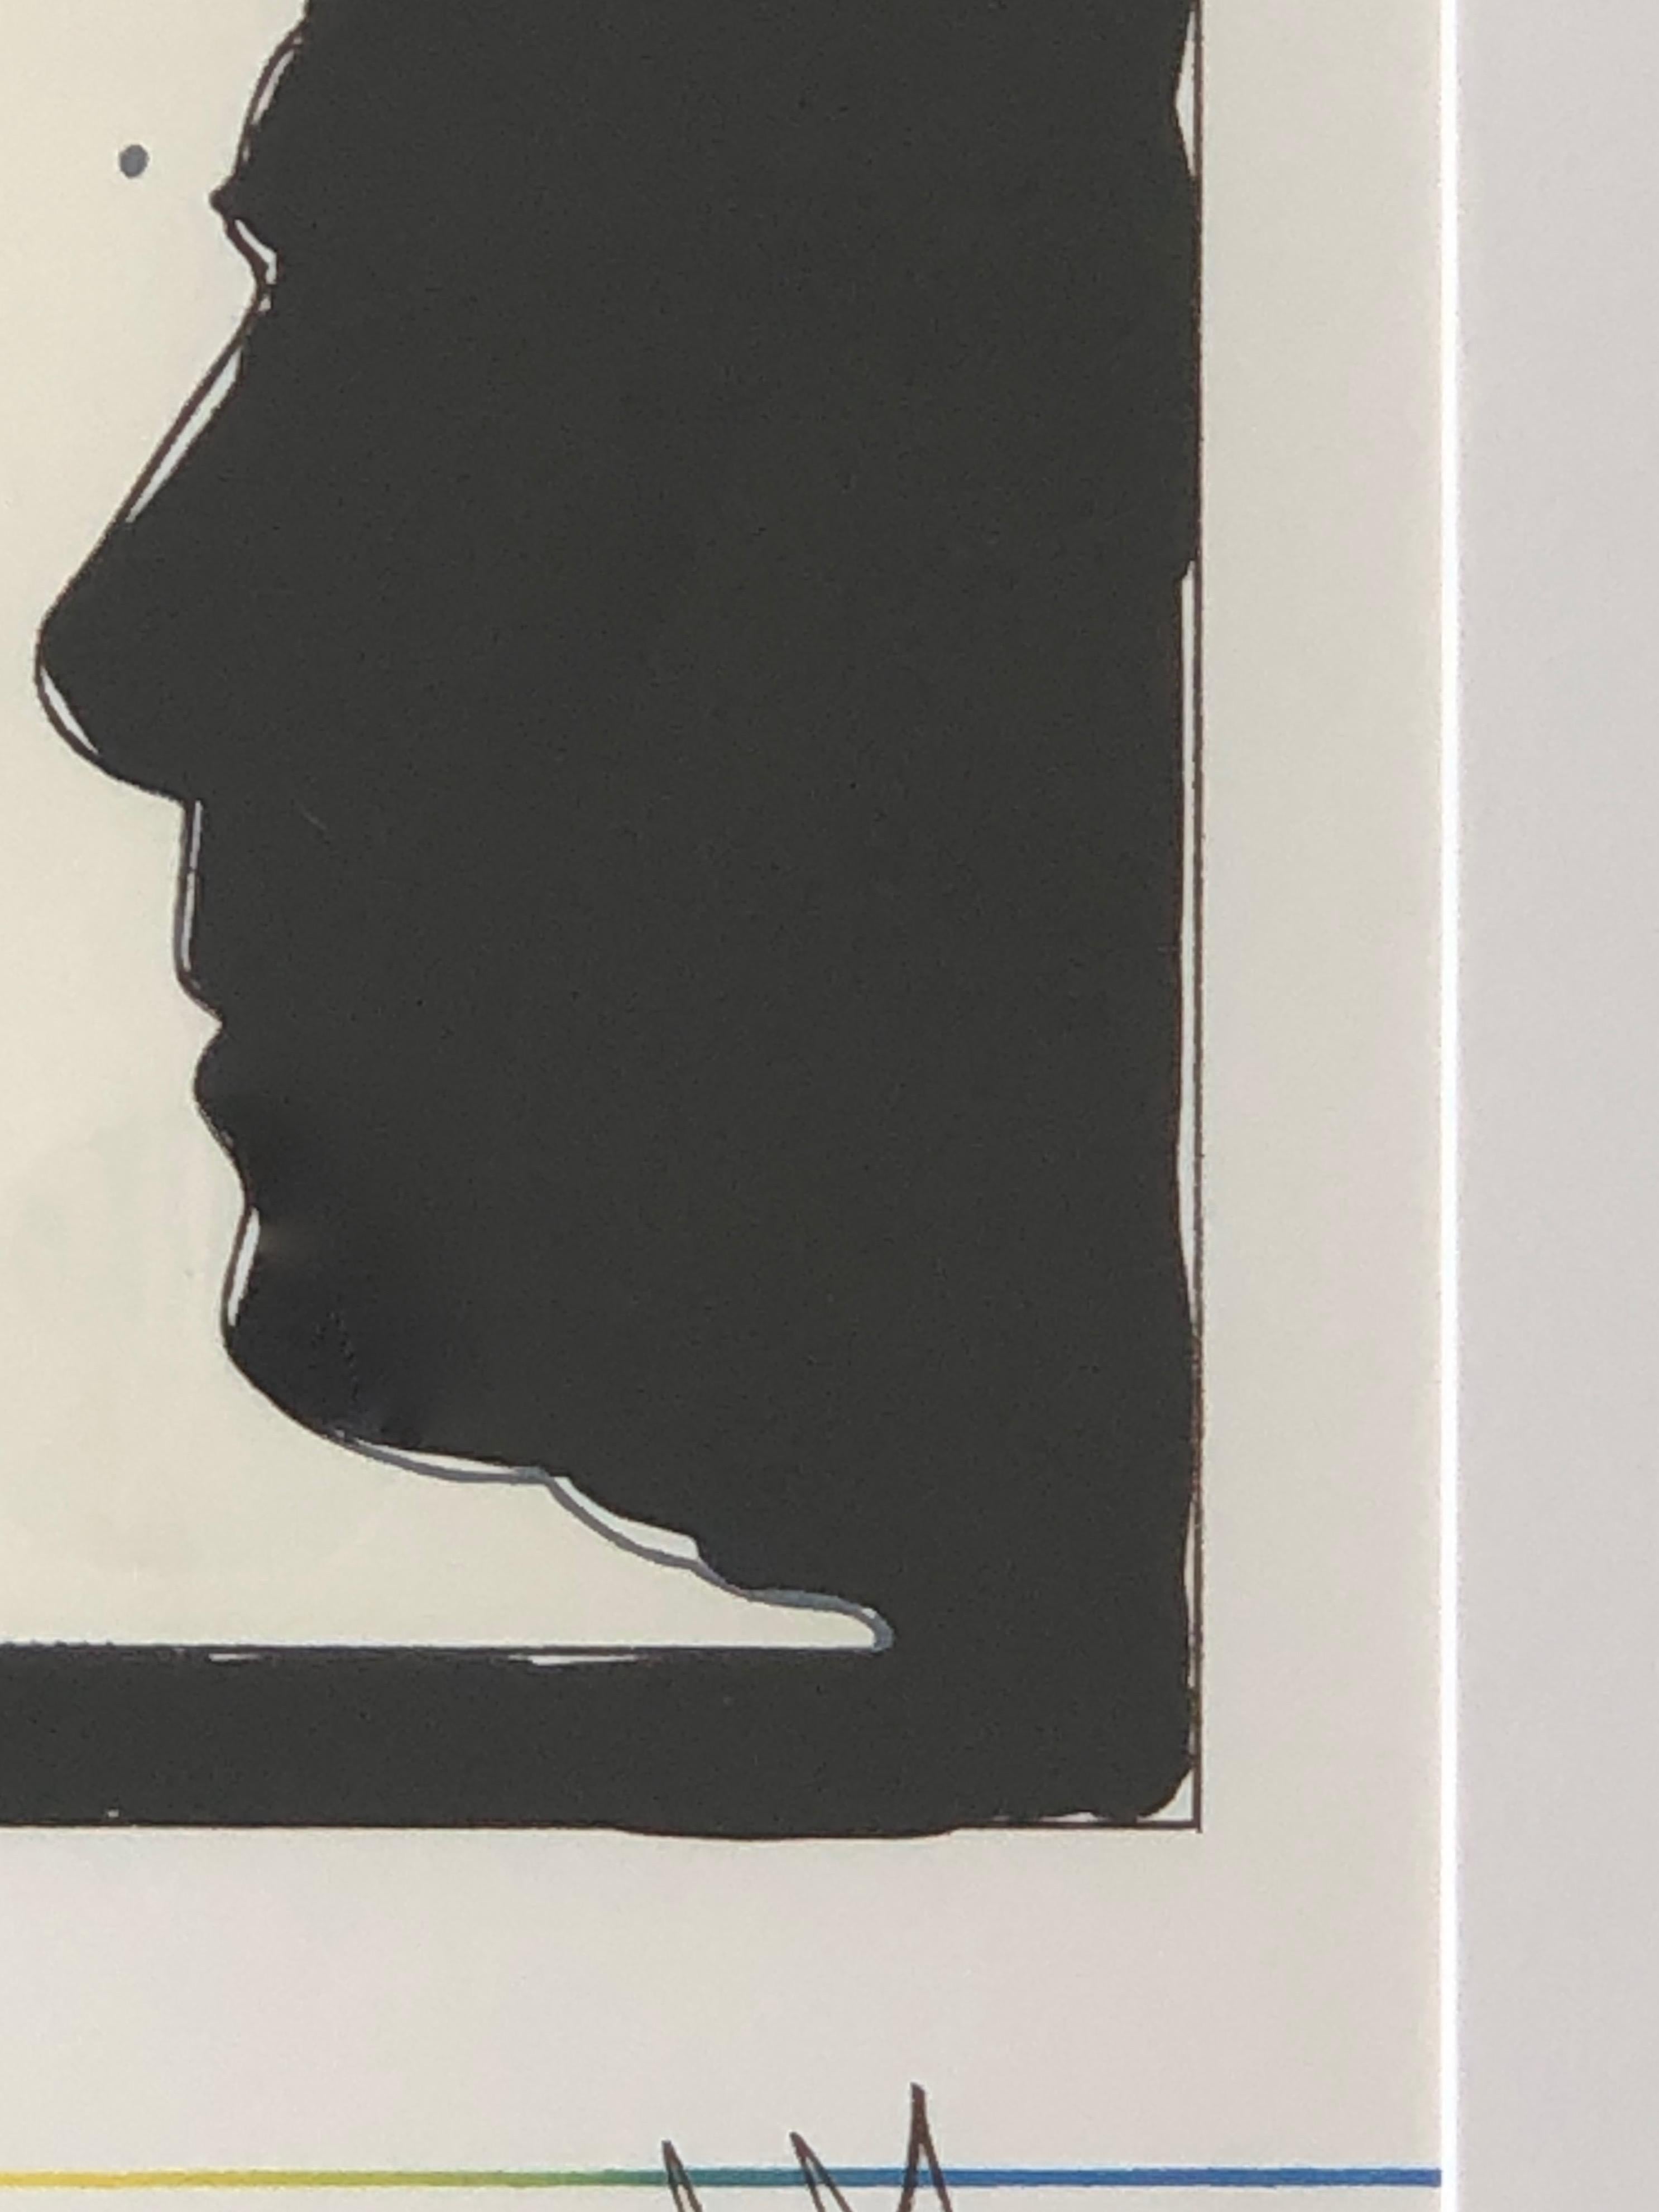 Century Black and White Jasper Johns Lithograph, Cup Two Picasso, 1973 1